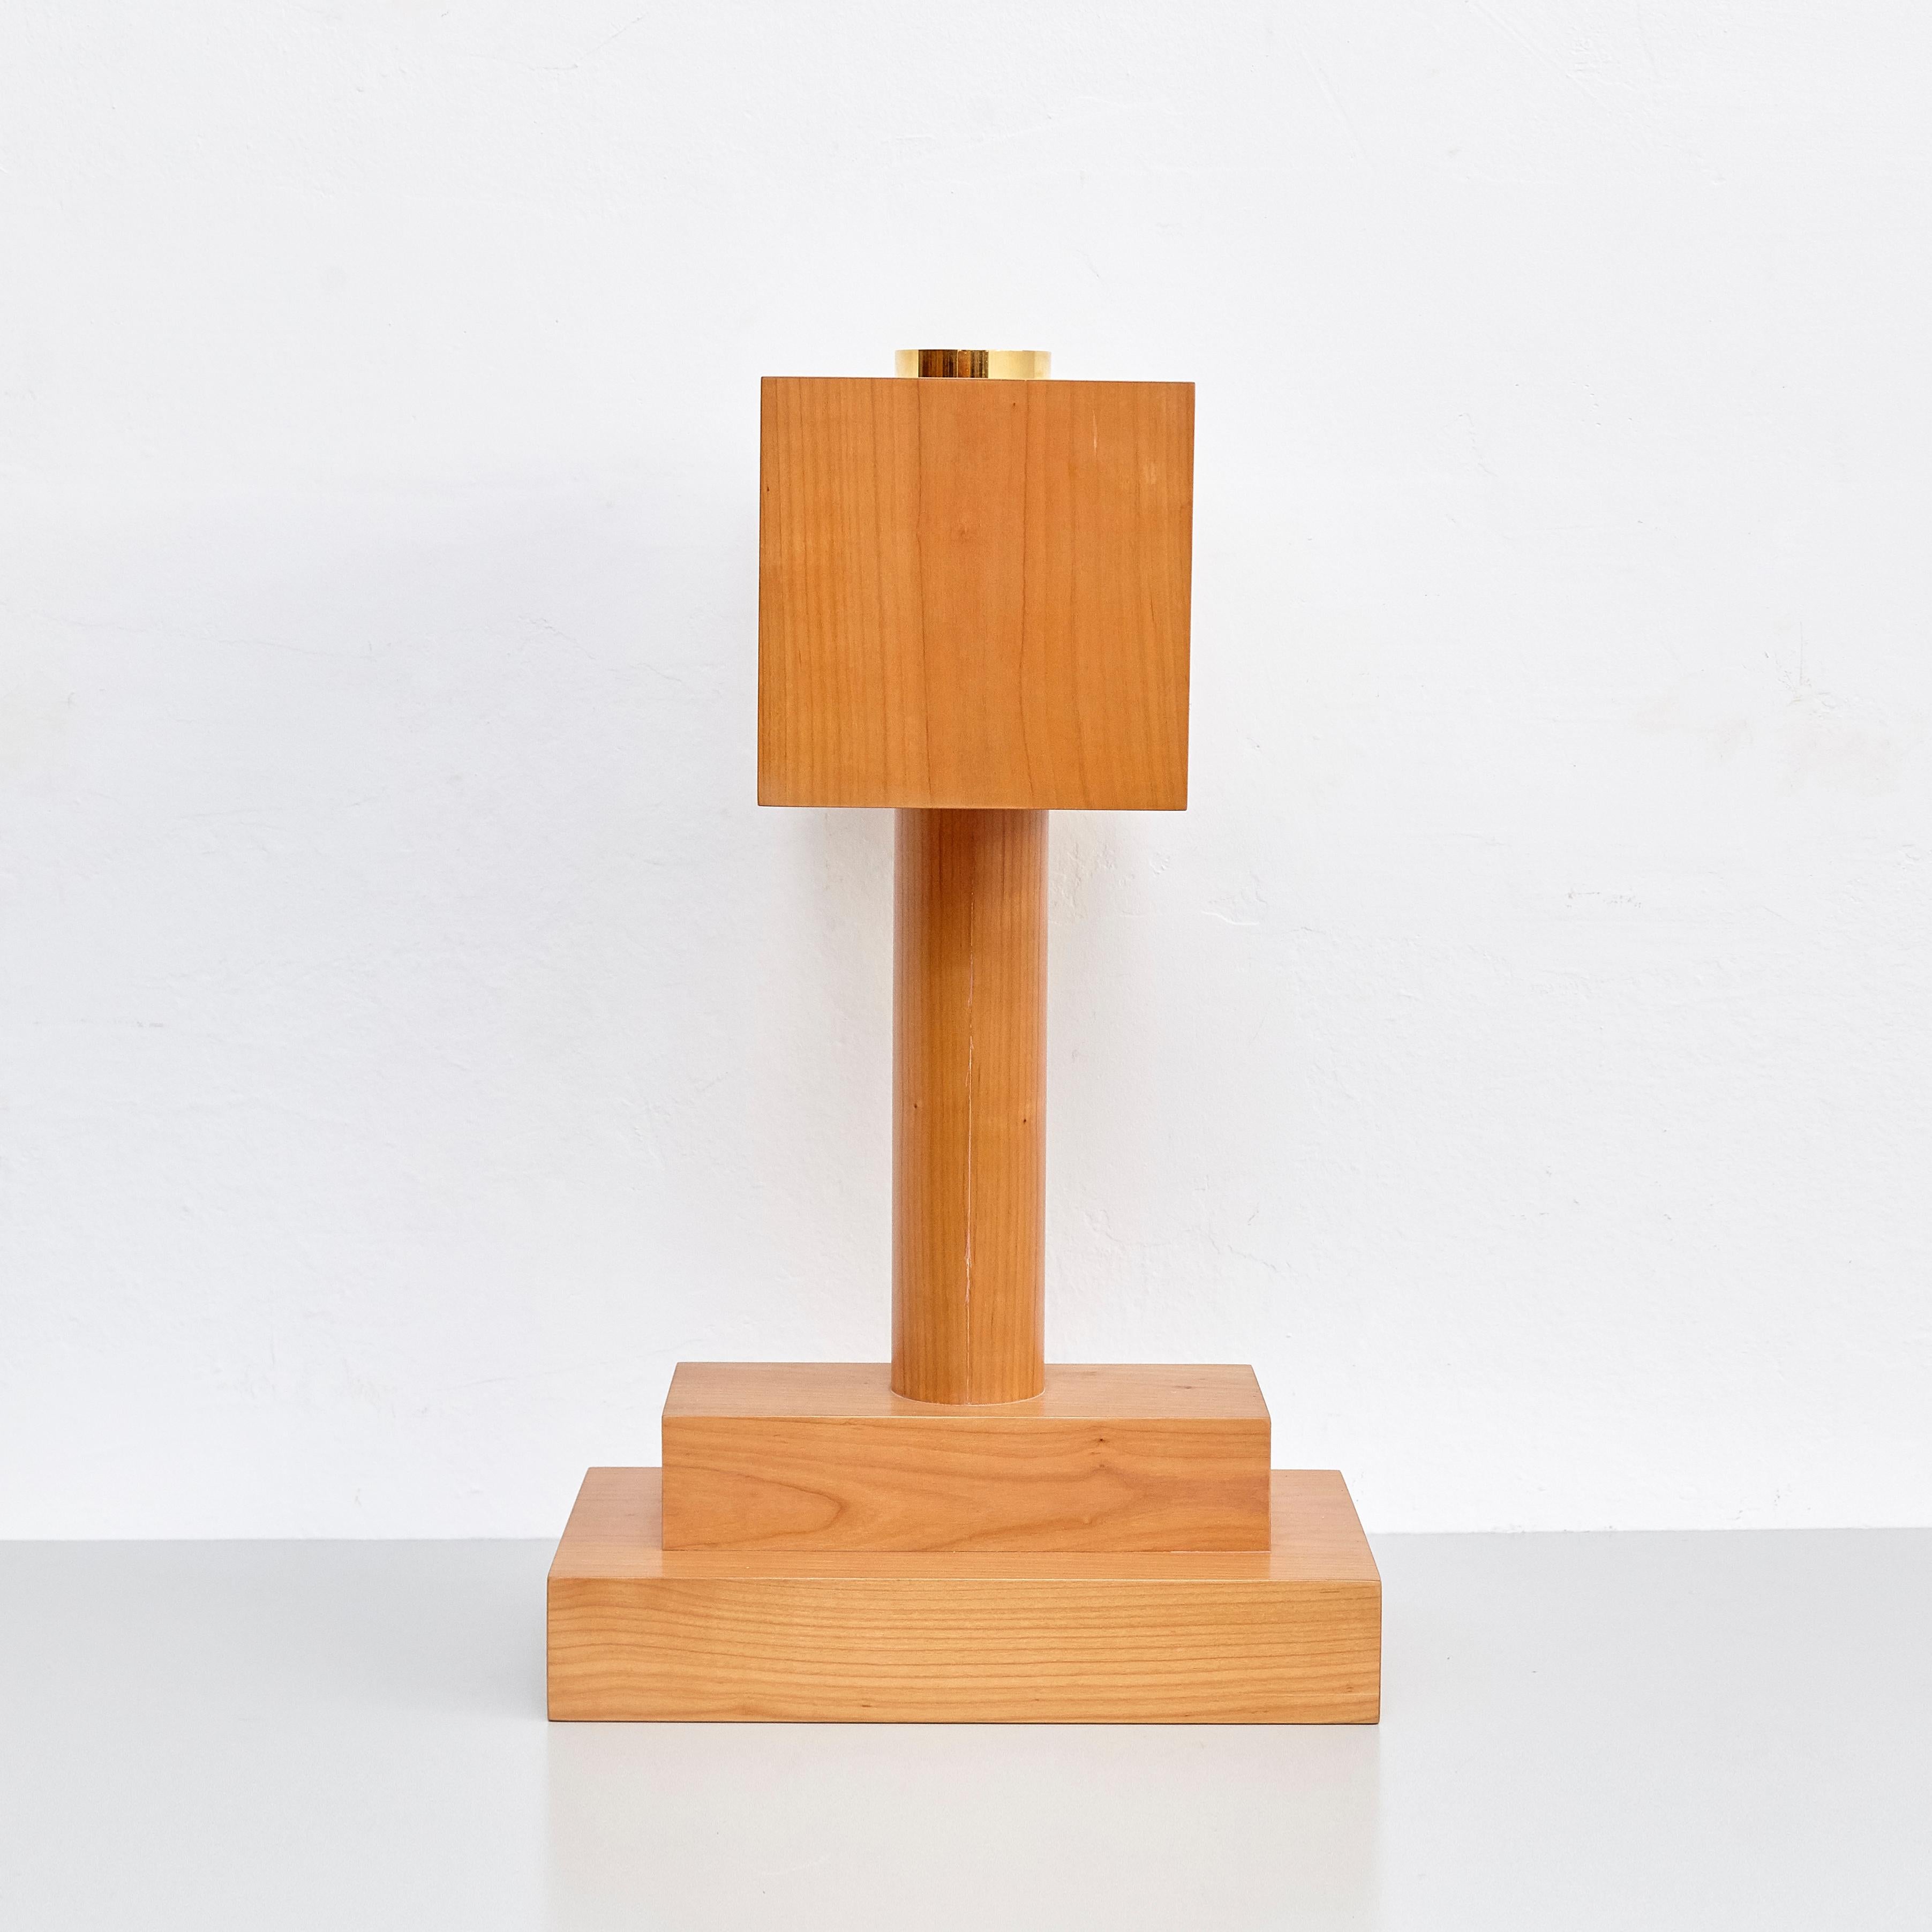 Italian Twenty-Seven Woods for a Chinese Artificial Flowers, Vase F by Ettore Sottsass